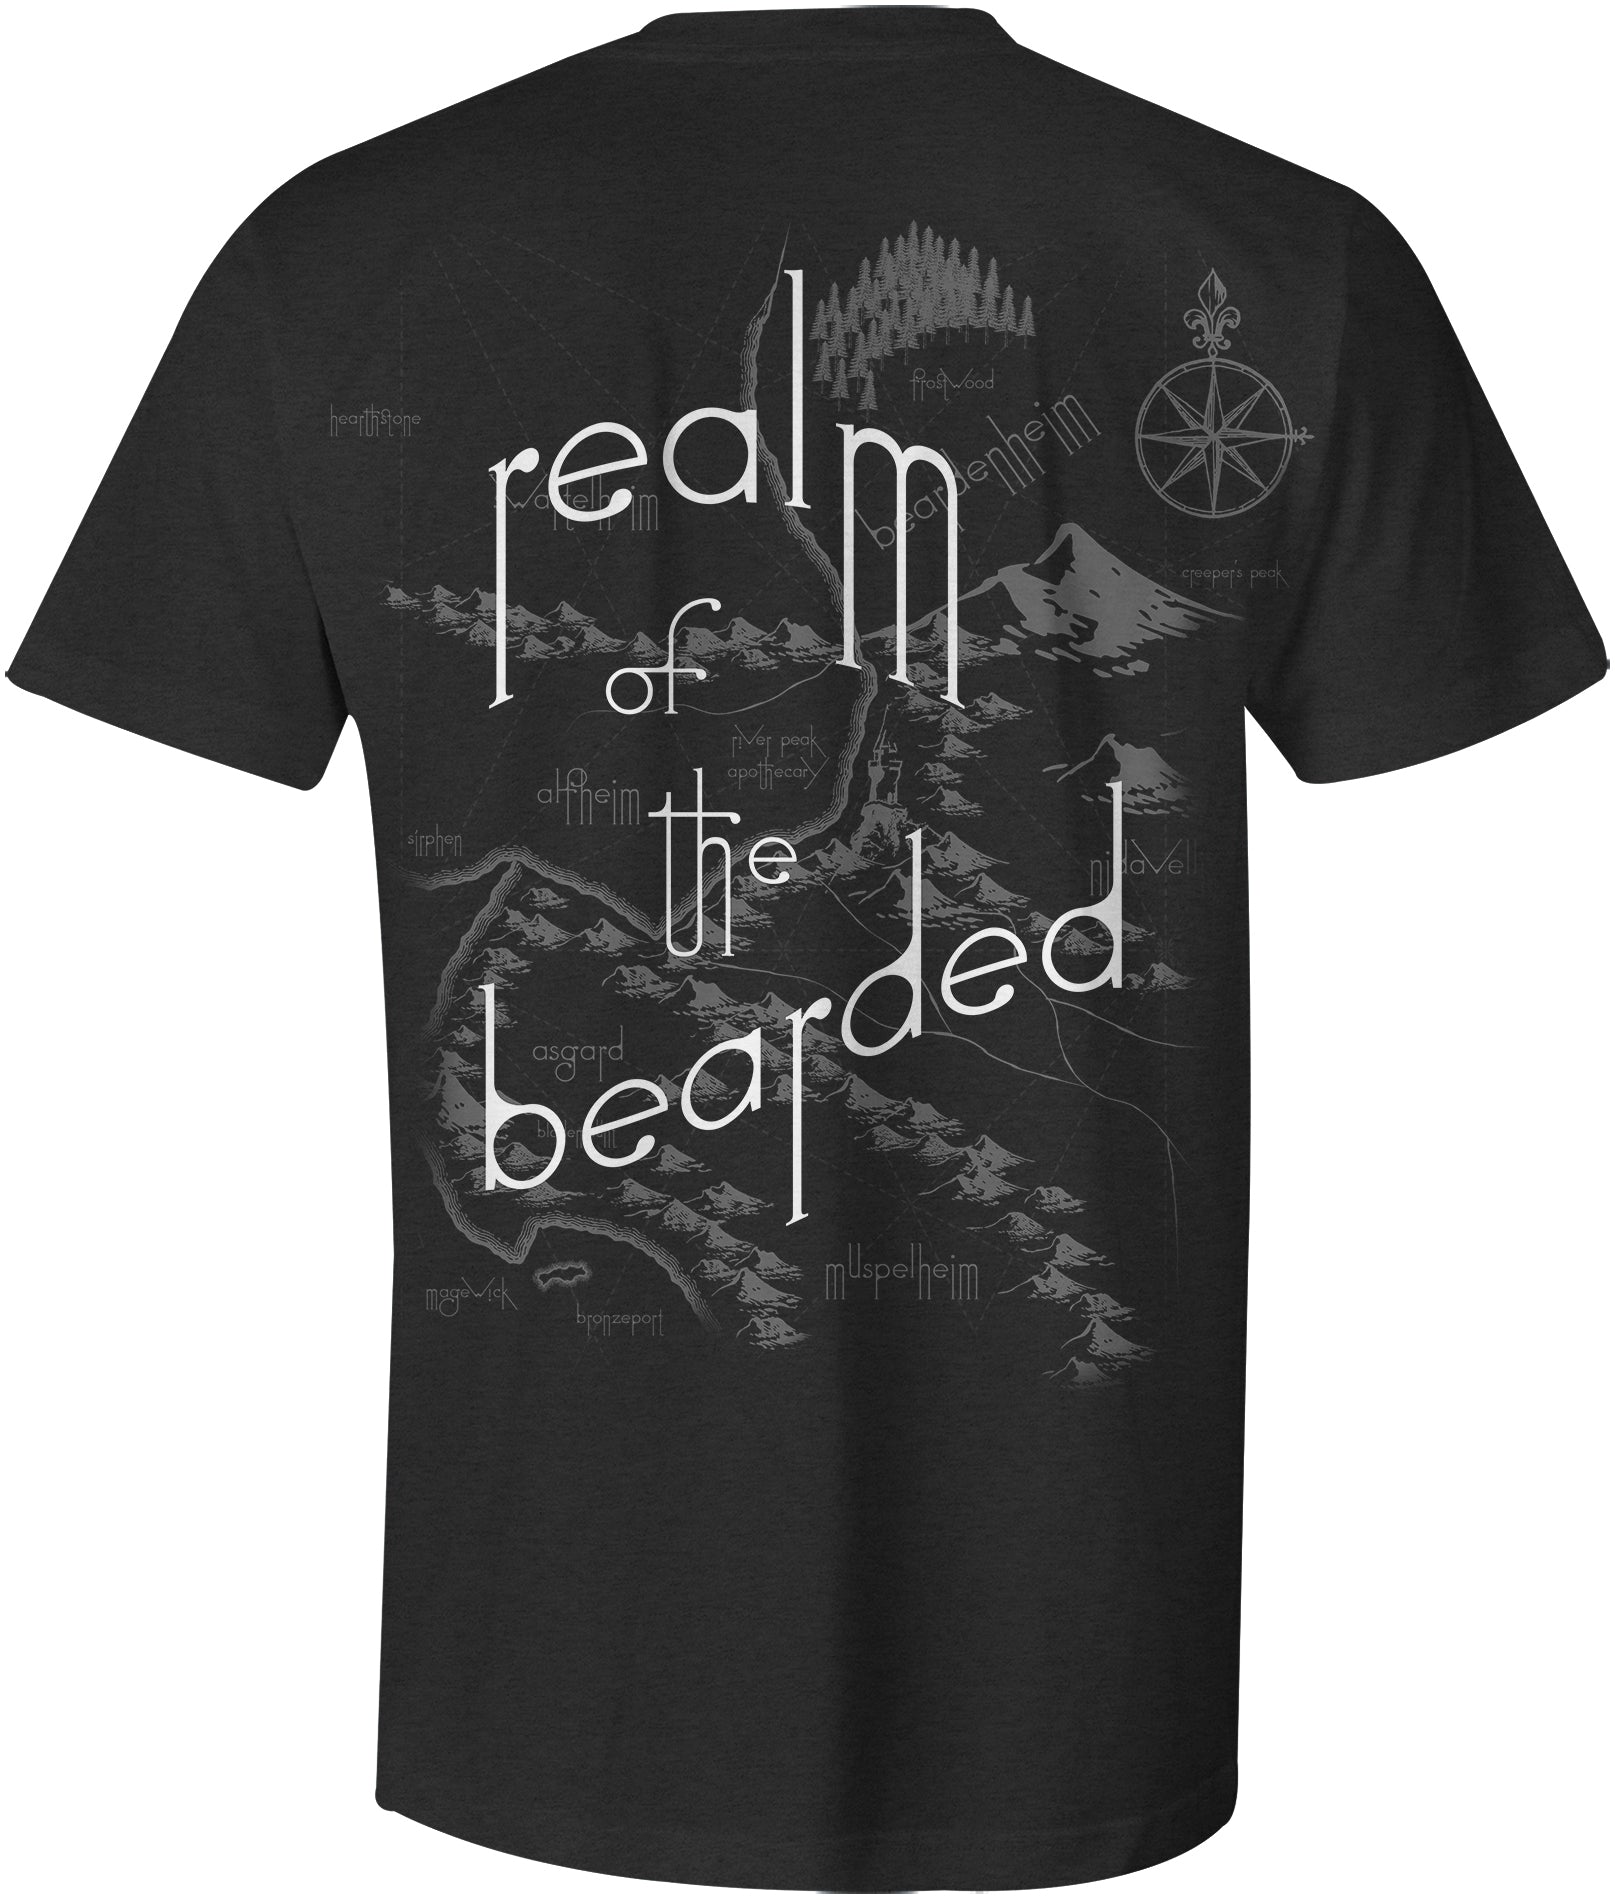 River Peak Realm of the Bearded T-Shirt {3 Colors}